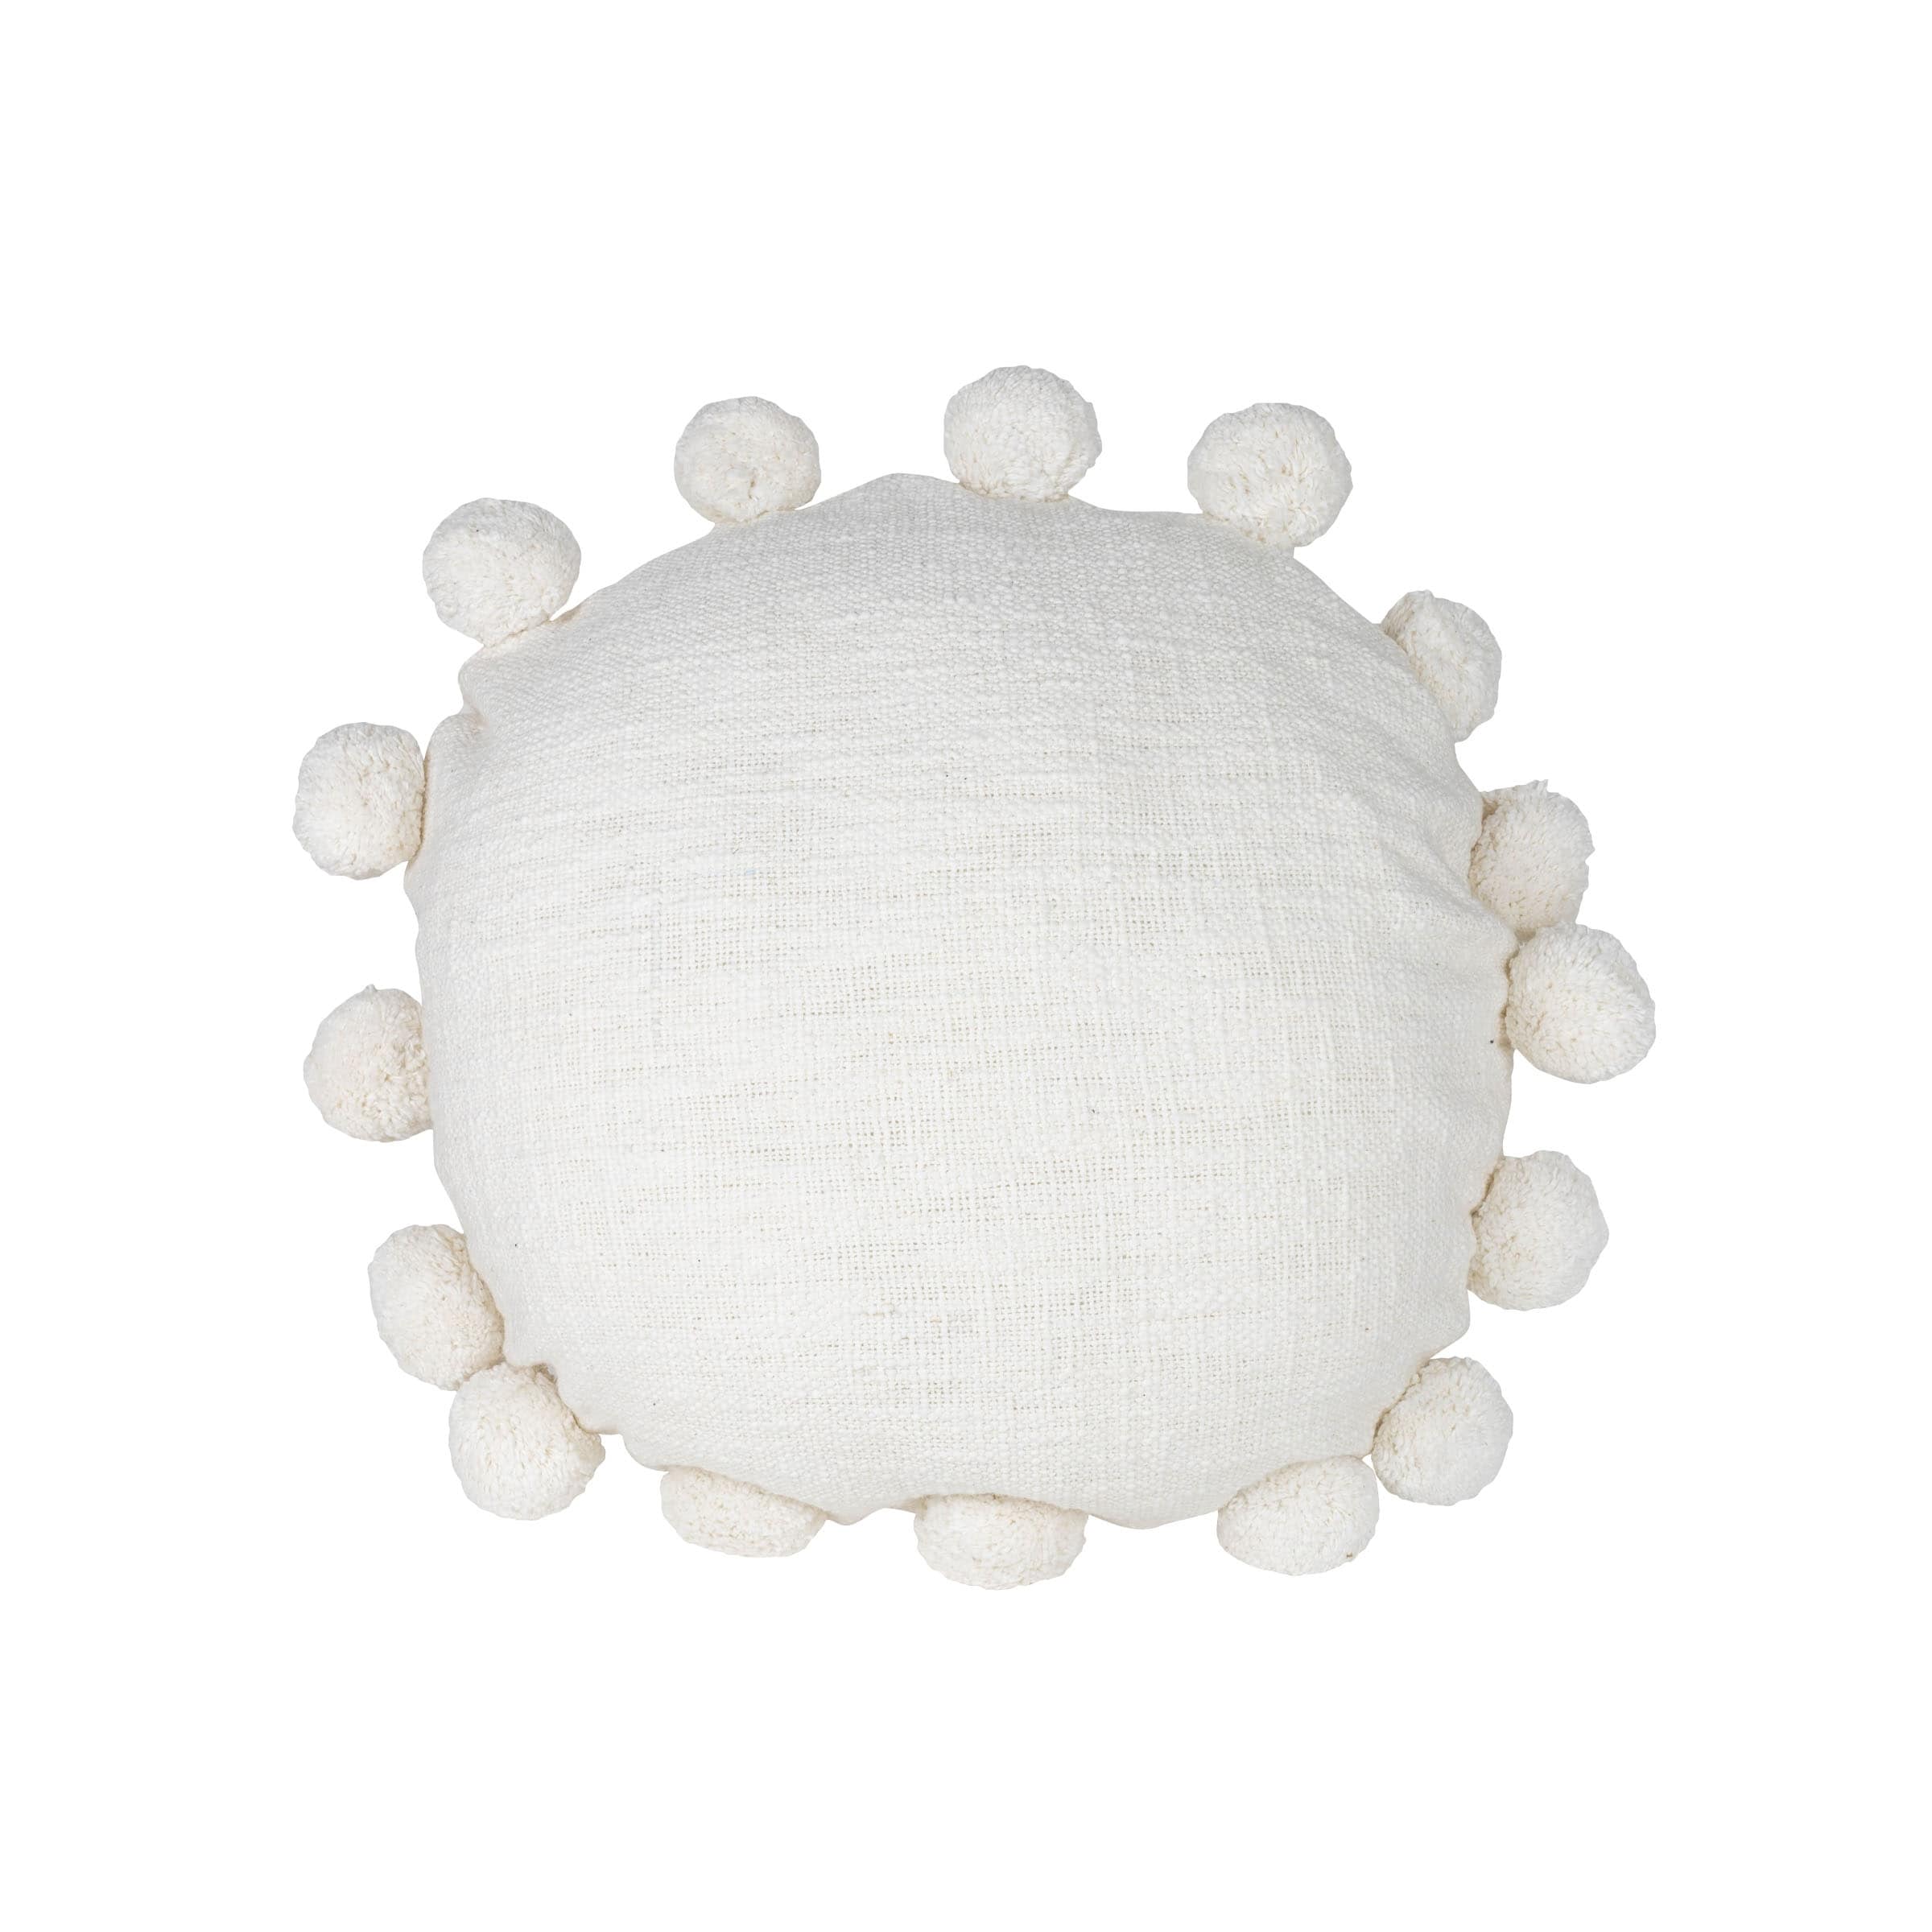 https://ak1.ostkcdn.com/images/products/is/images/direct/f45b9870ee0ad1e7270fec86b04226745755b7a9/Foreside-Home-%26-Garden-White-with-Pom-Poms-16X16-Filled-Round-Pillow.jpg